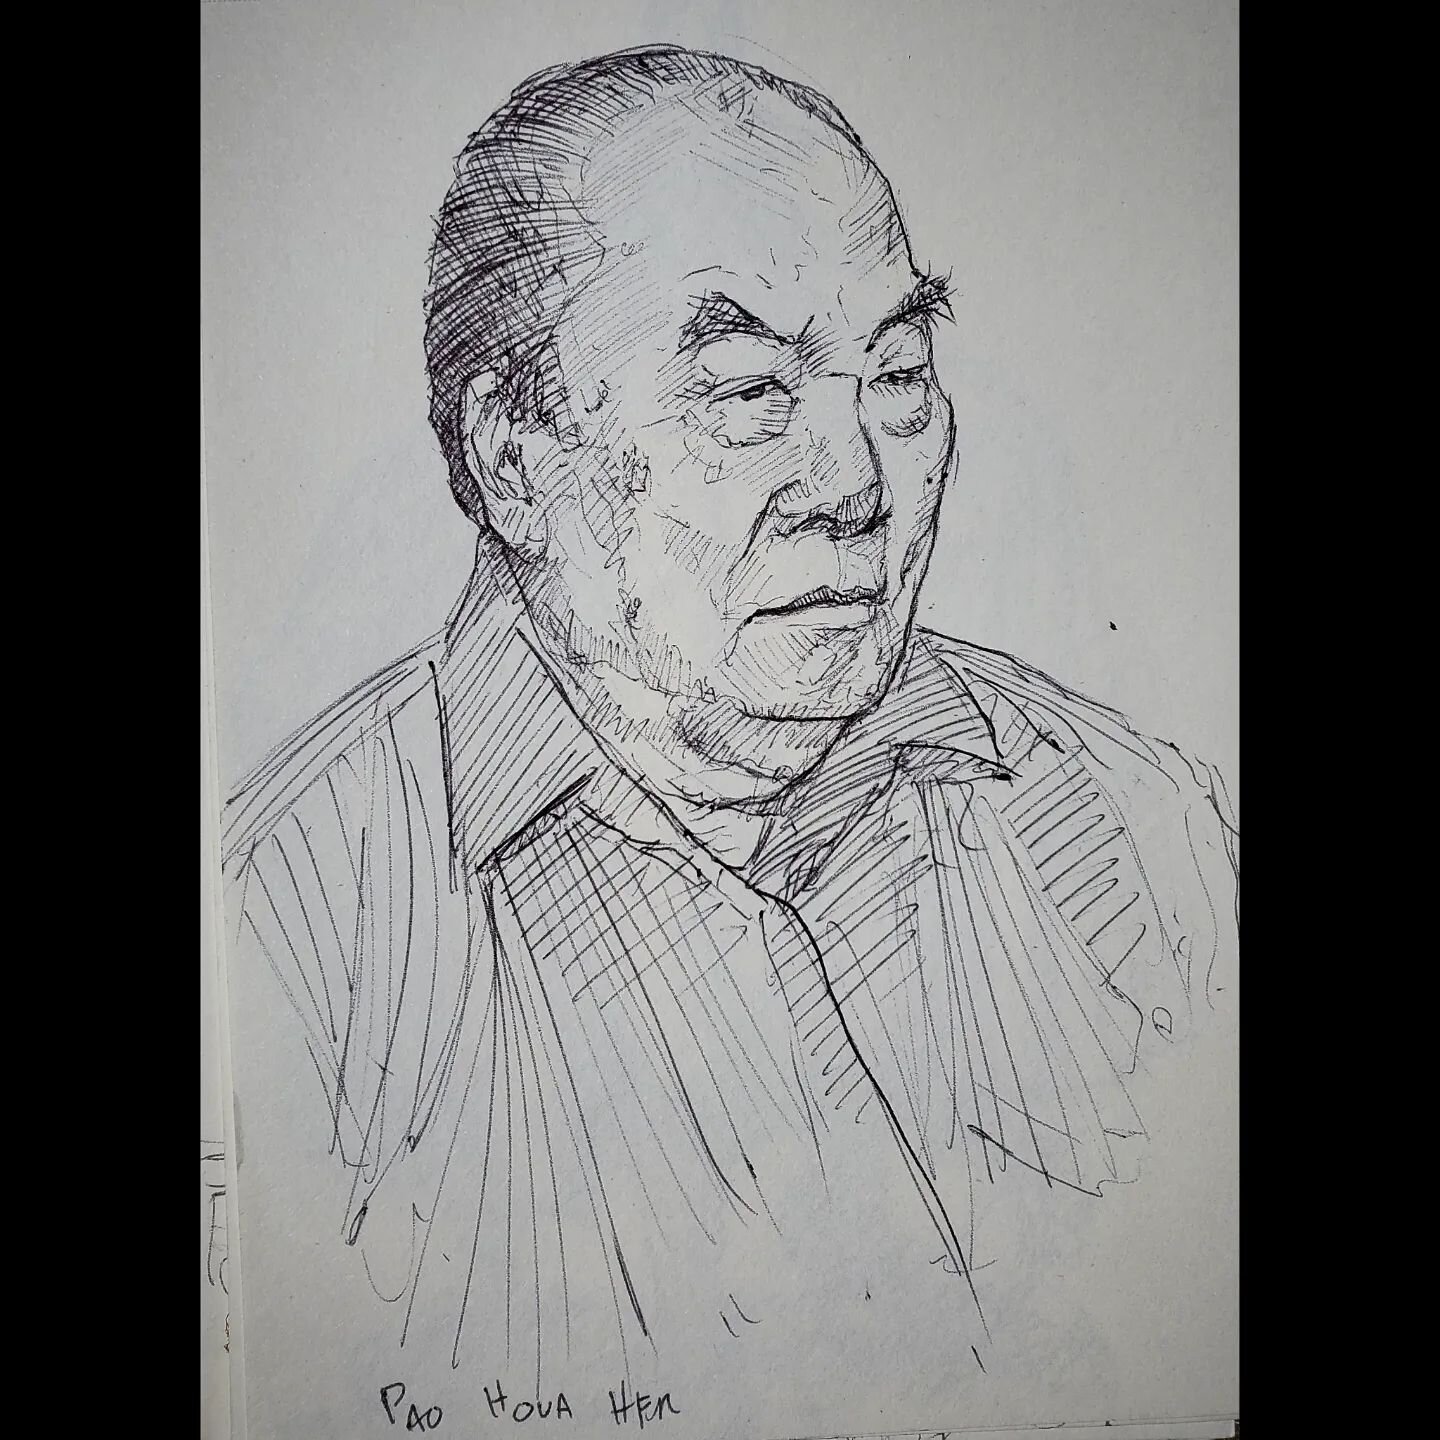 20 minute art study from the National Portrait Gallery in DC.
.
&quot;Untitled (man)&quot; by Pao Houa Her
.
.
.
#cameronbyeart #nationalportraitgallery #artstudy #sketchbook #sketching #sketch #pen #portrait